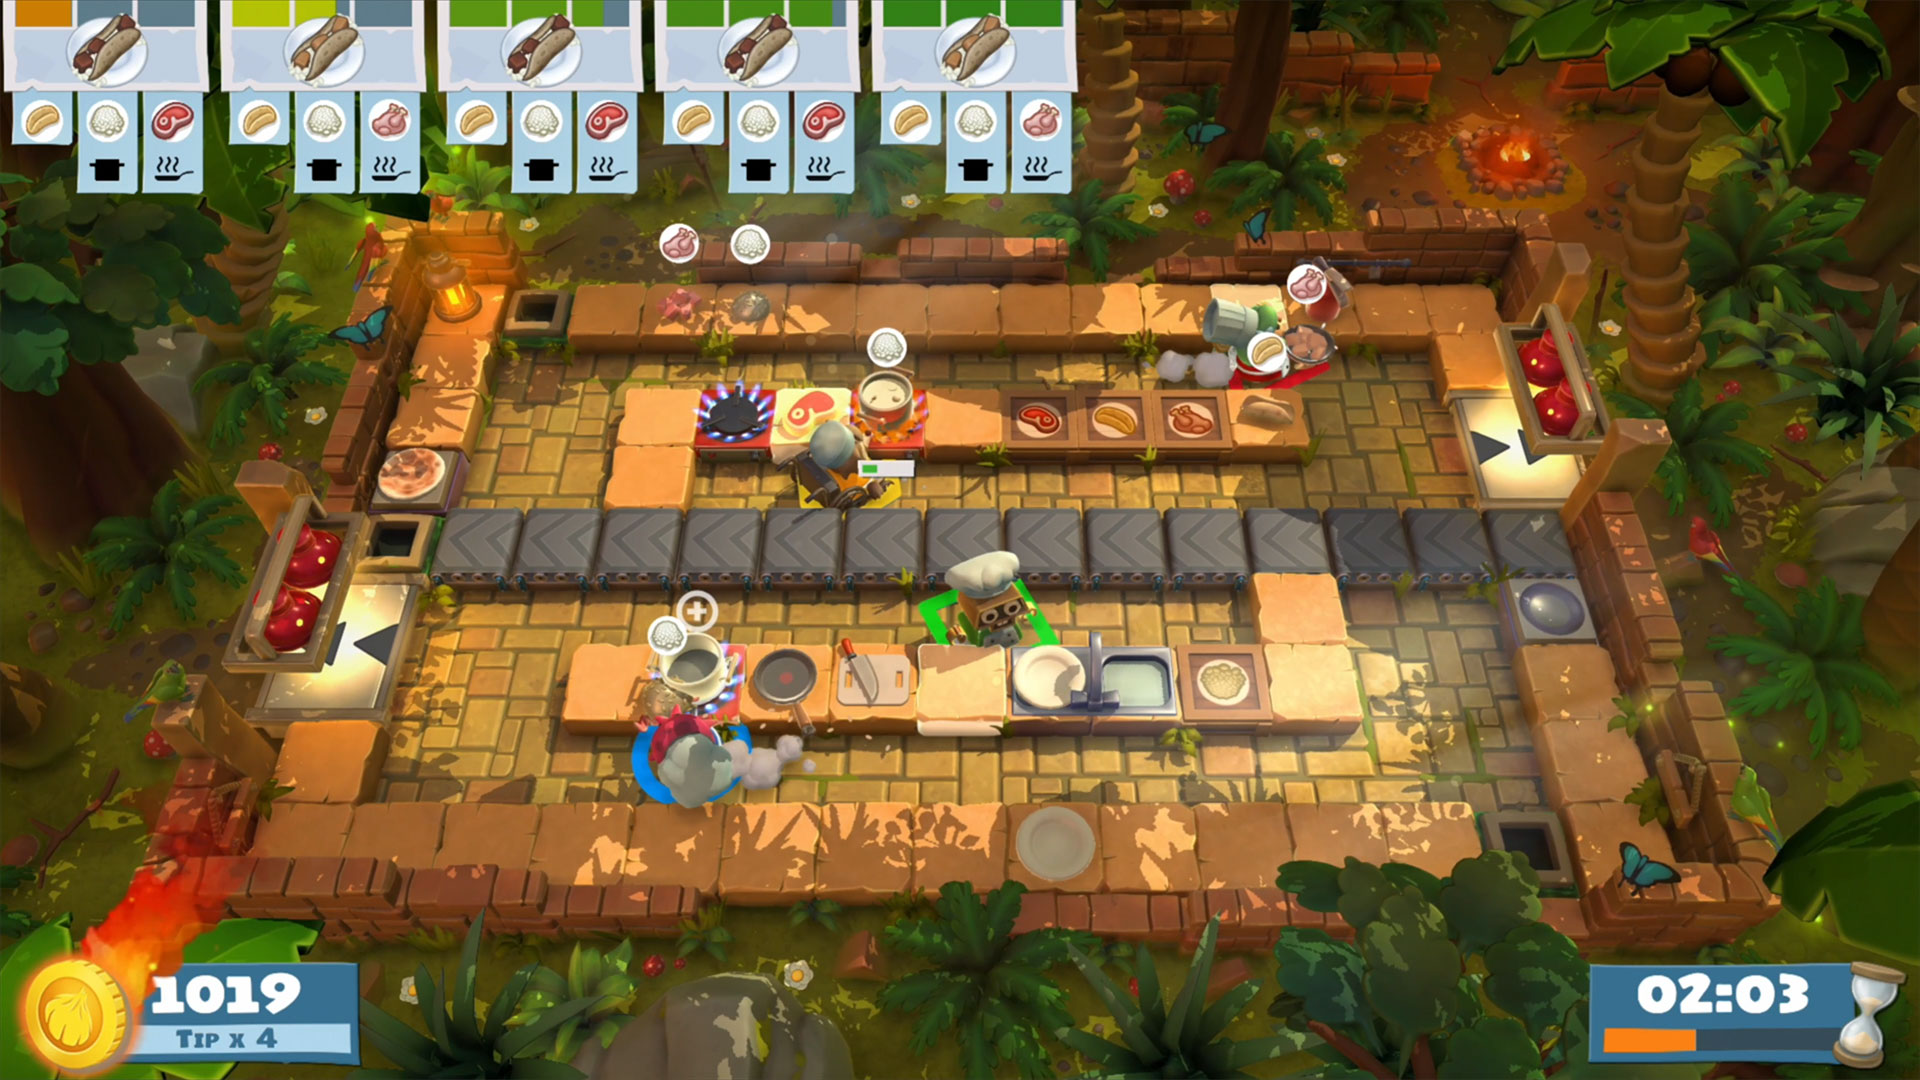 Overcooked! All You Can Eat coming to PS4, Xbox One, Switch, and